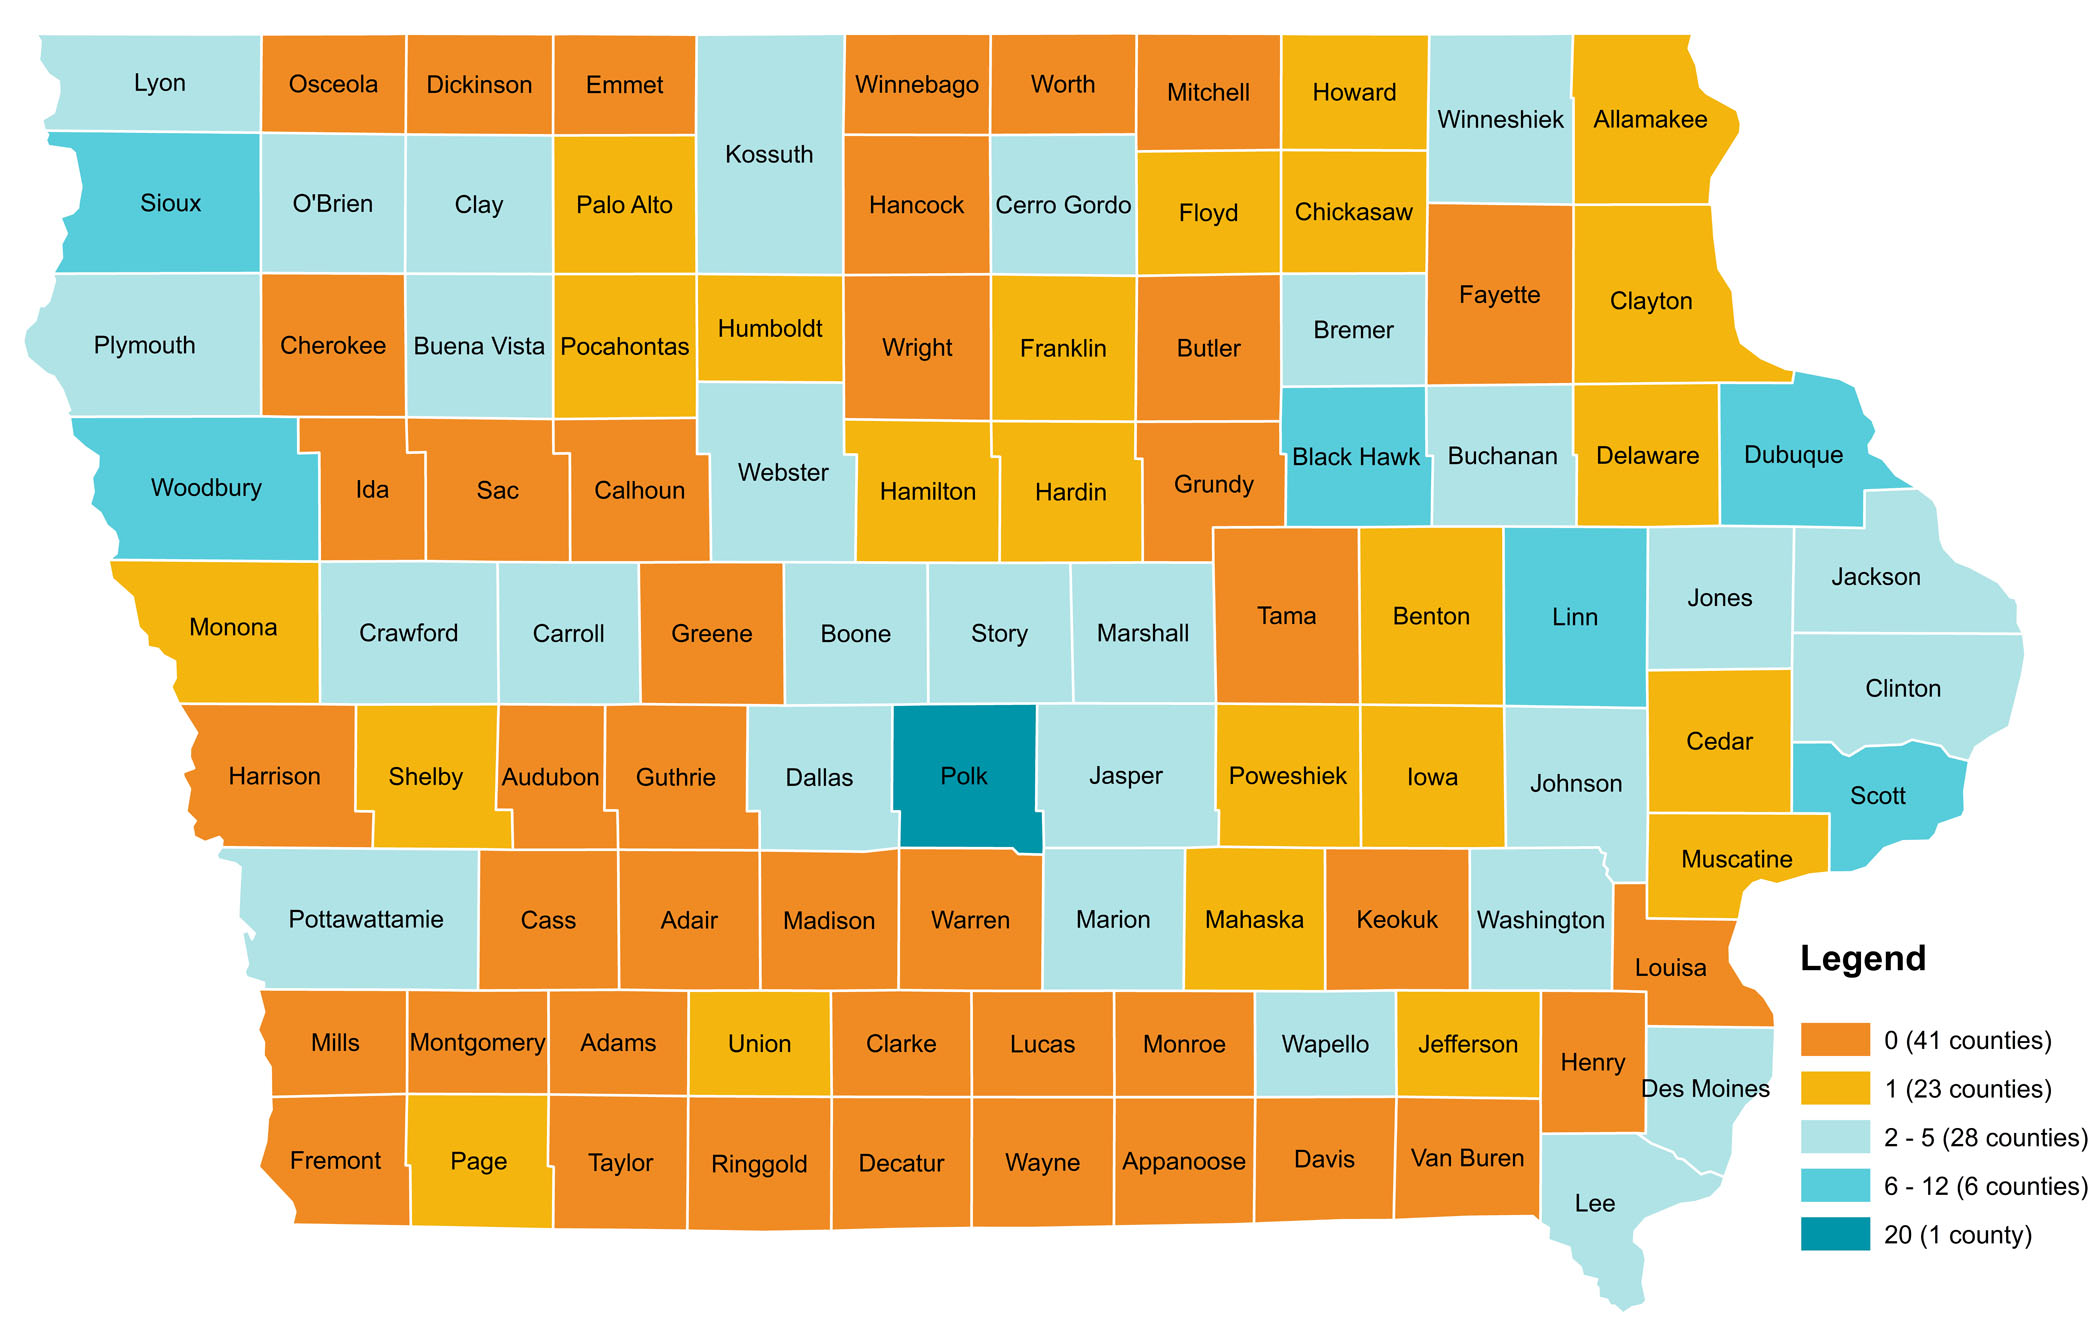 private-schools-by-county-map-7.jpg